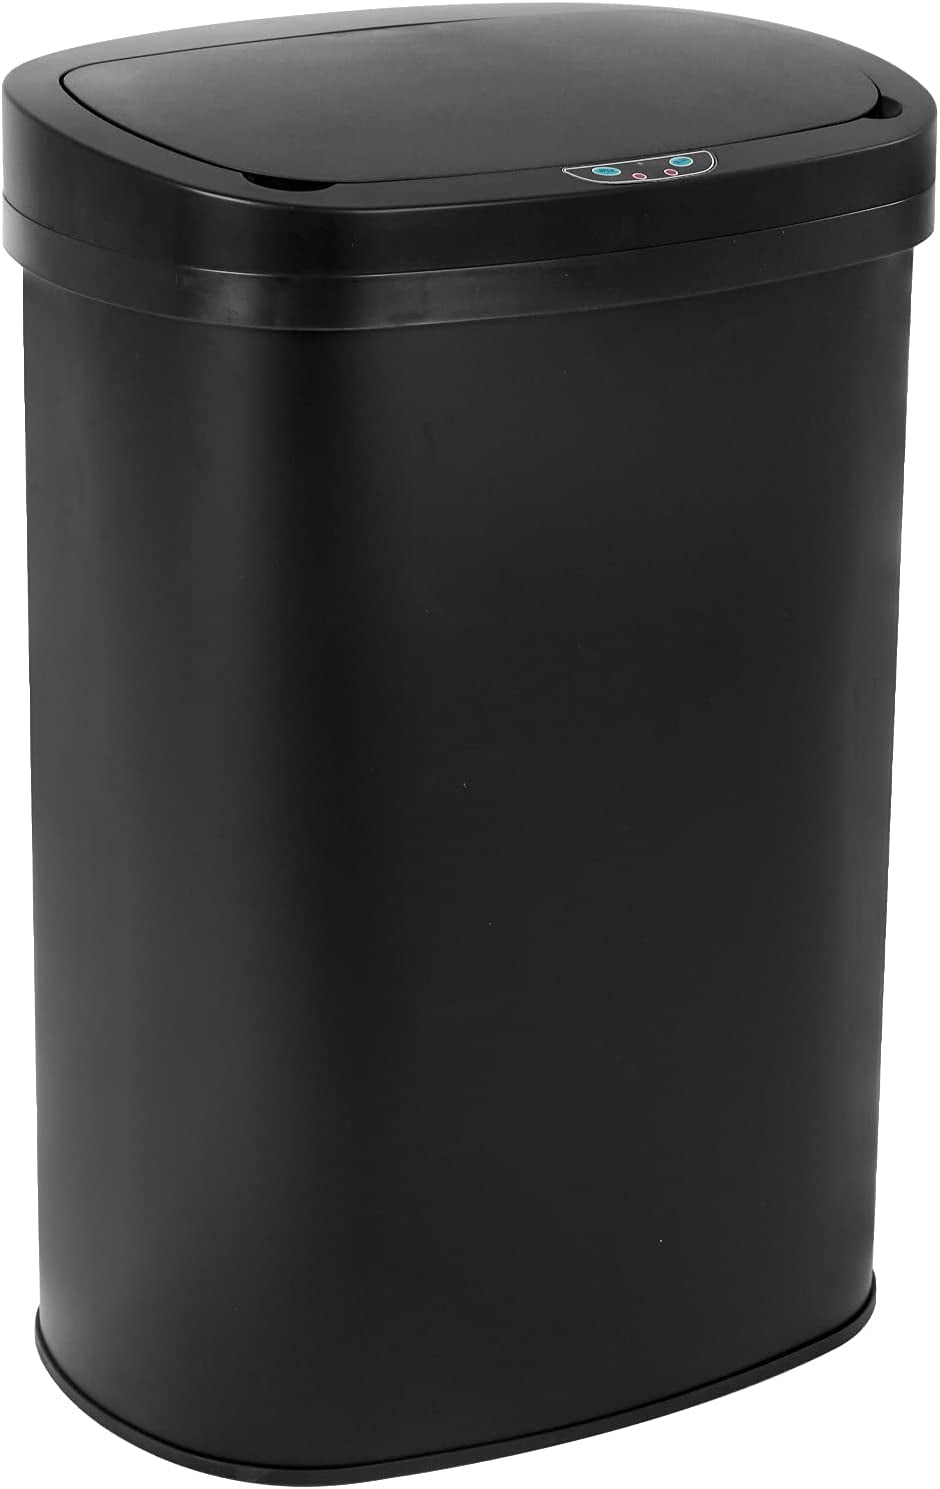 Stainless Steel 50L Automatic Trash Can for Kitchen Office Bedroom Indoor Trash Bin 13 Gallon Sensor Garbage Can Kitchen with Lid 